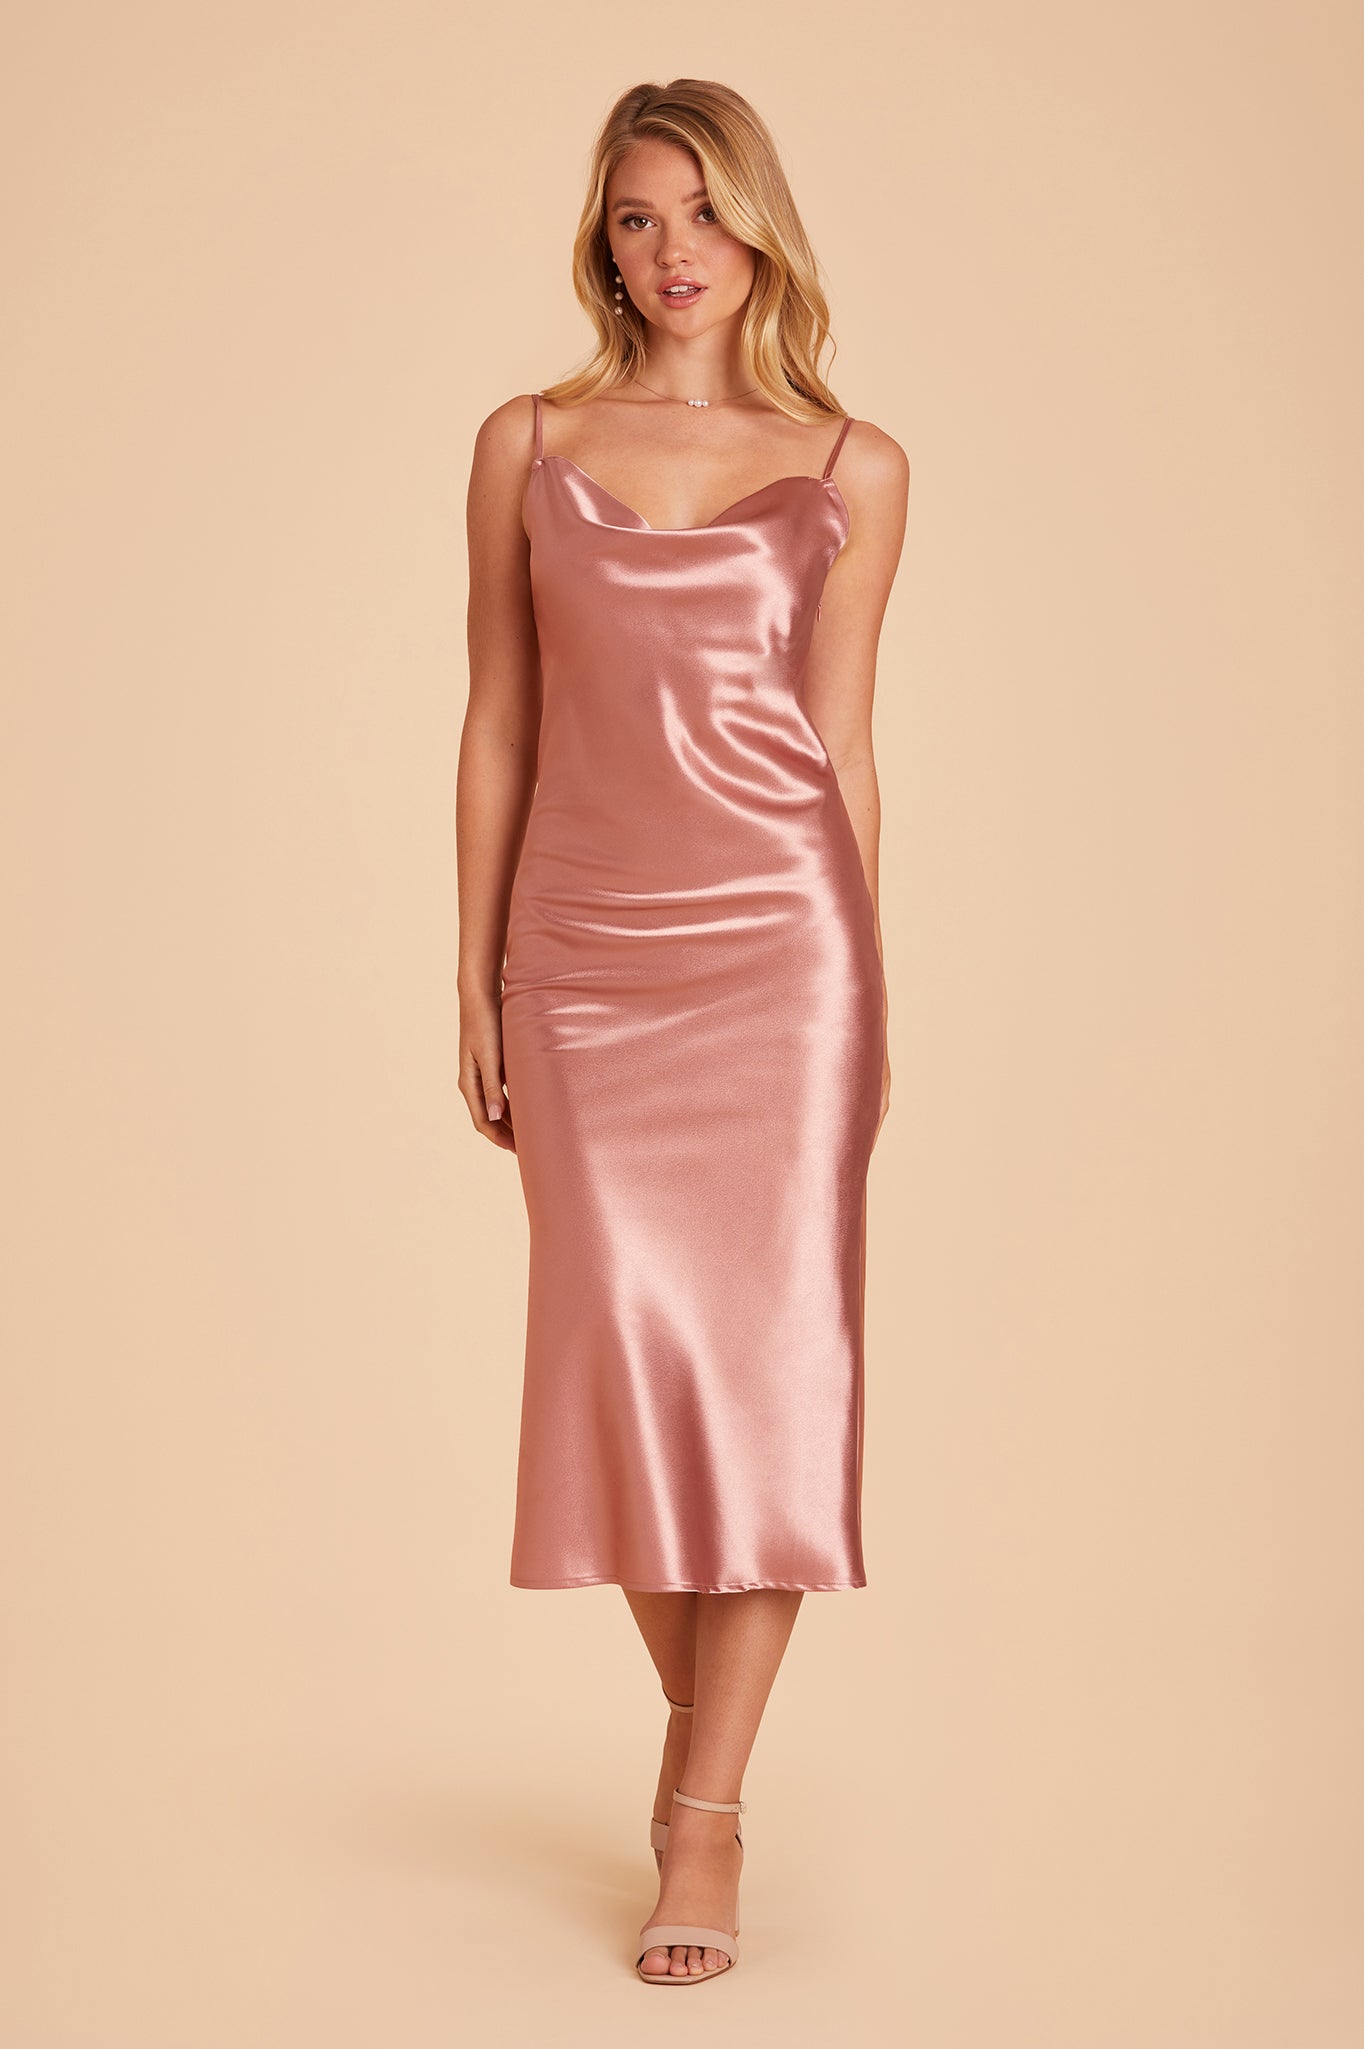 Lisa midi bridesmaid dress in desert rose satin by Birdy Grey, front view